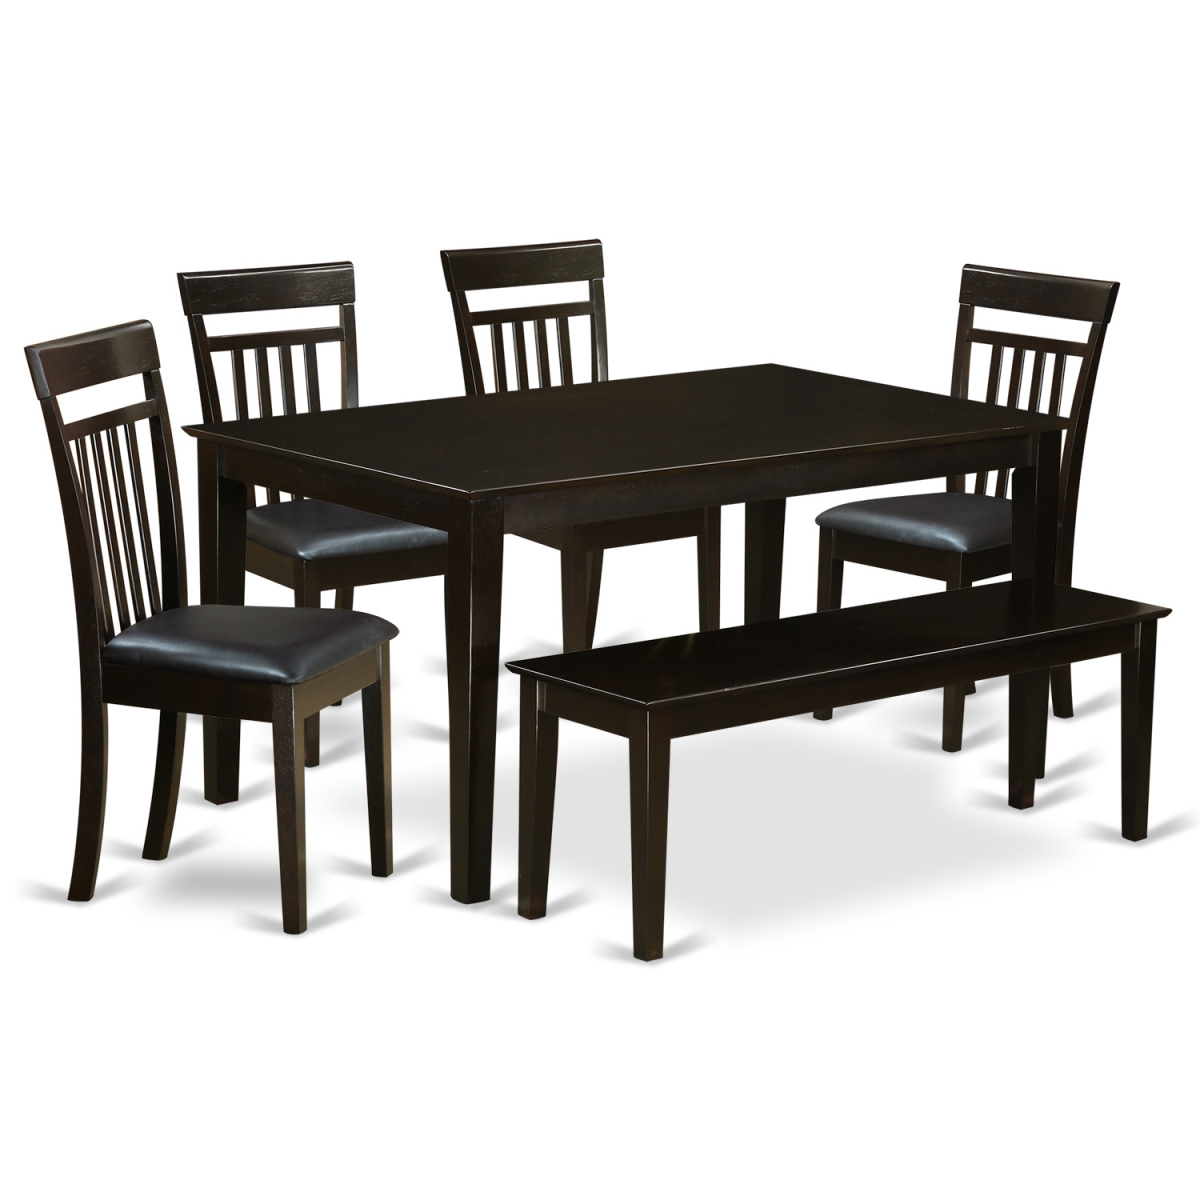 Picture of East West Furniture CAP6S-CAP-LC Dining Table Set - Solid Top Kitchen Table & 4 Chairs Plus 1 Bench - 6 Piece